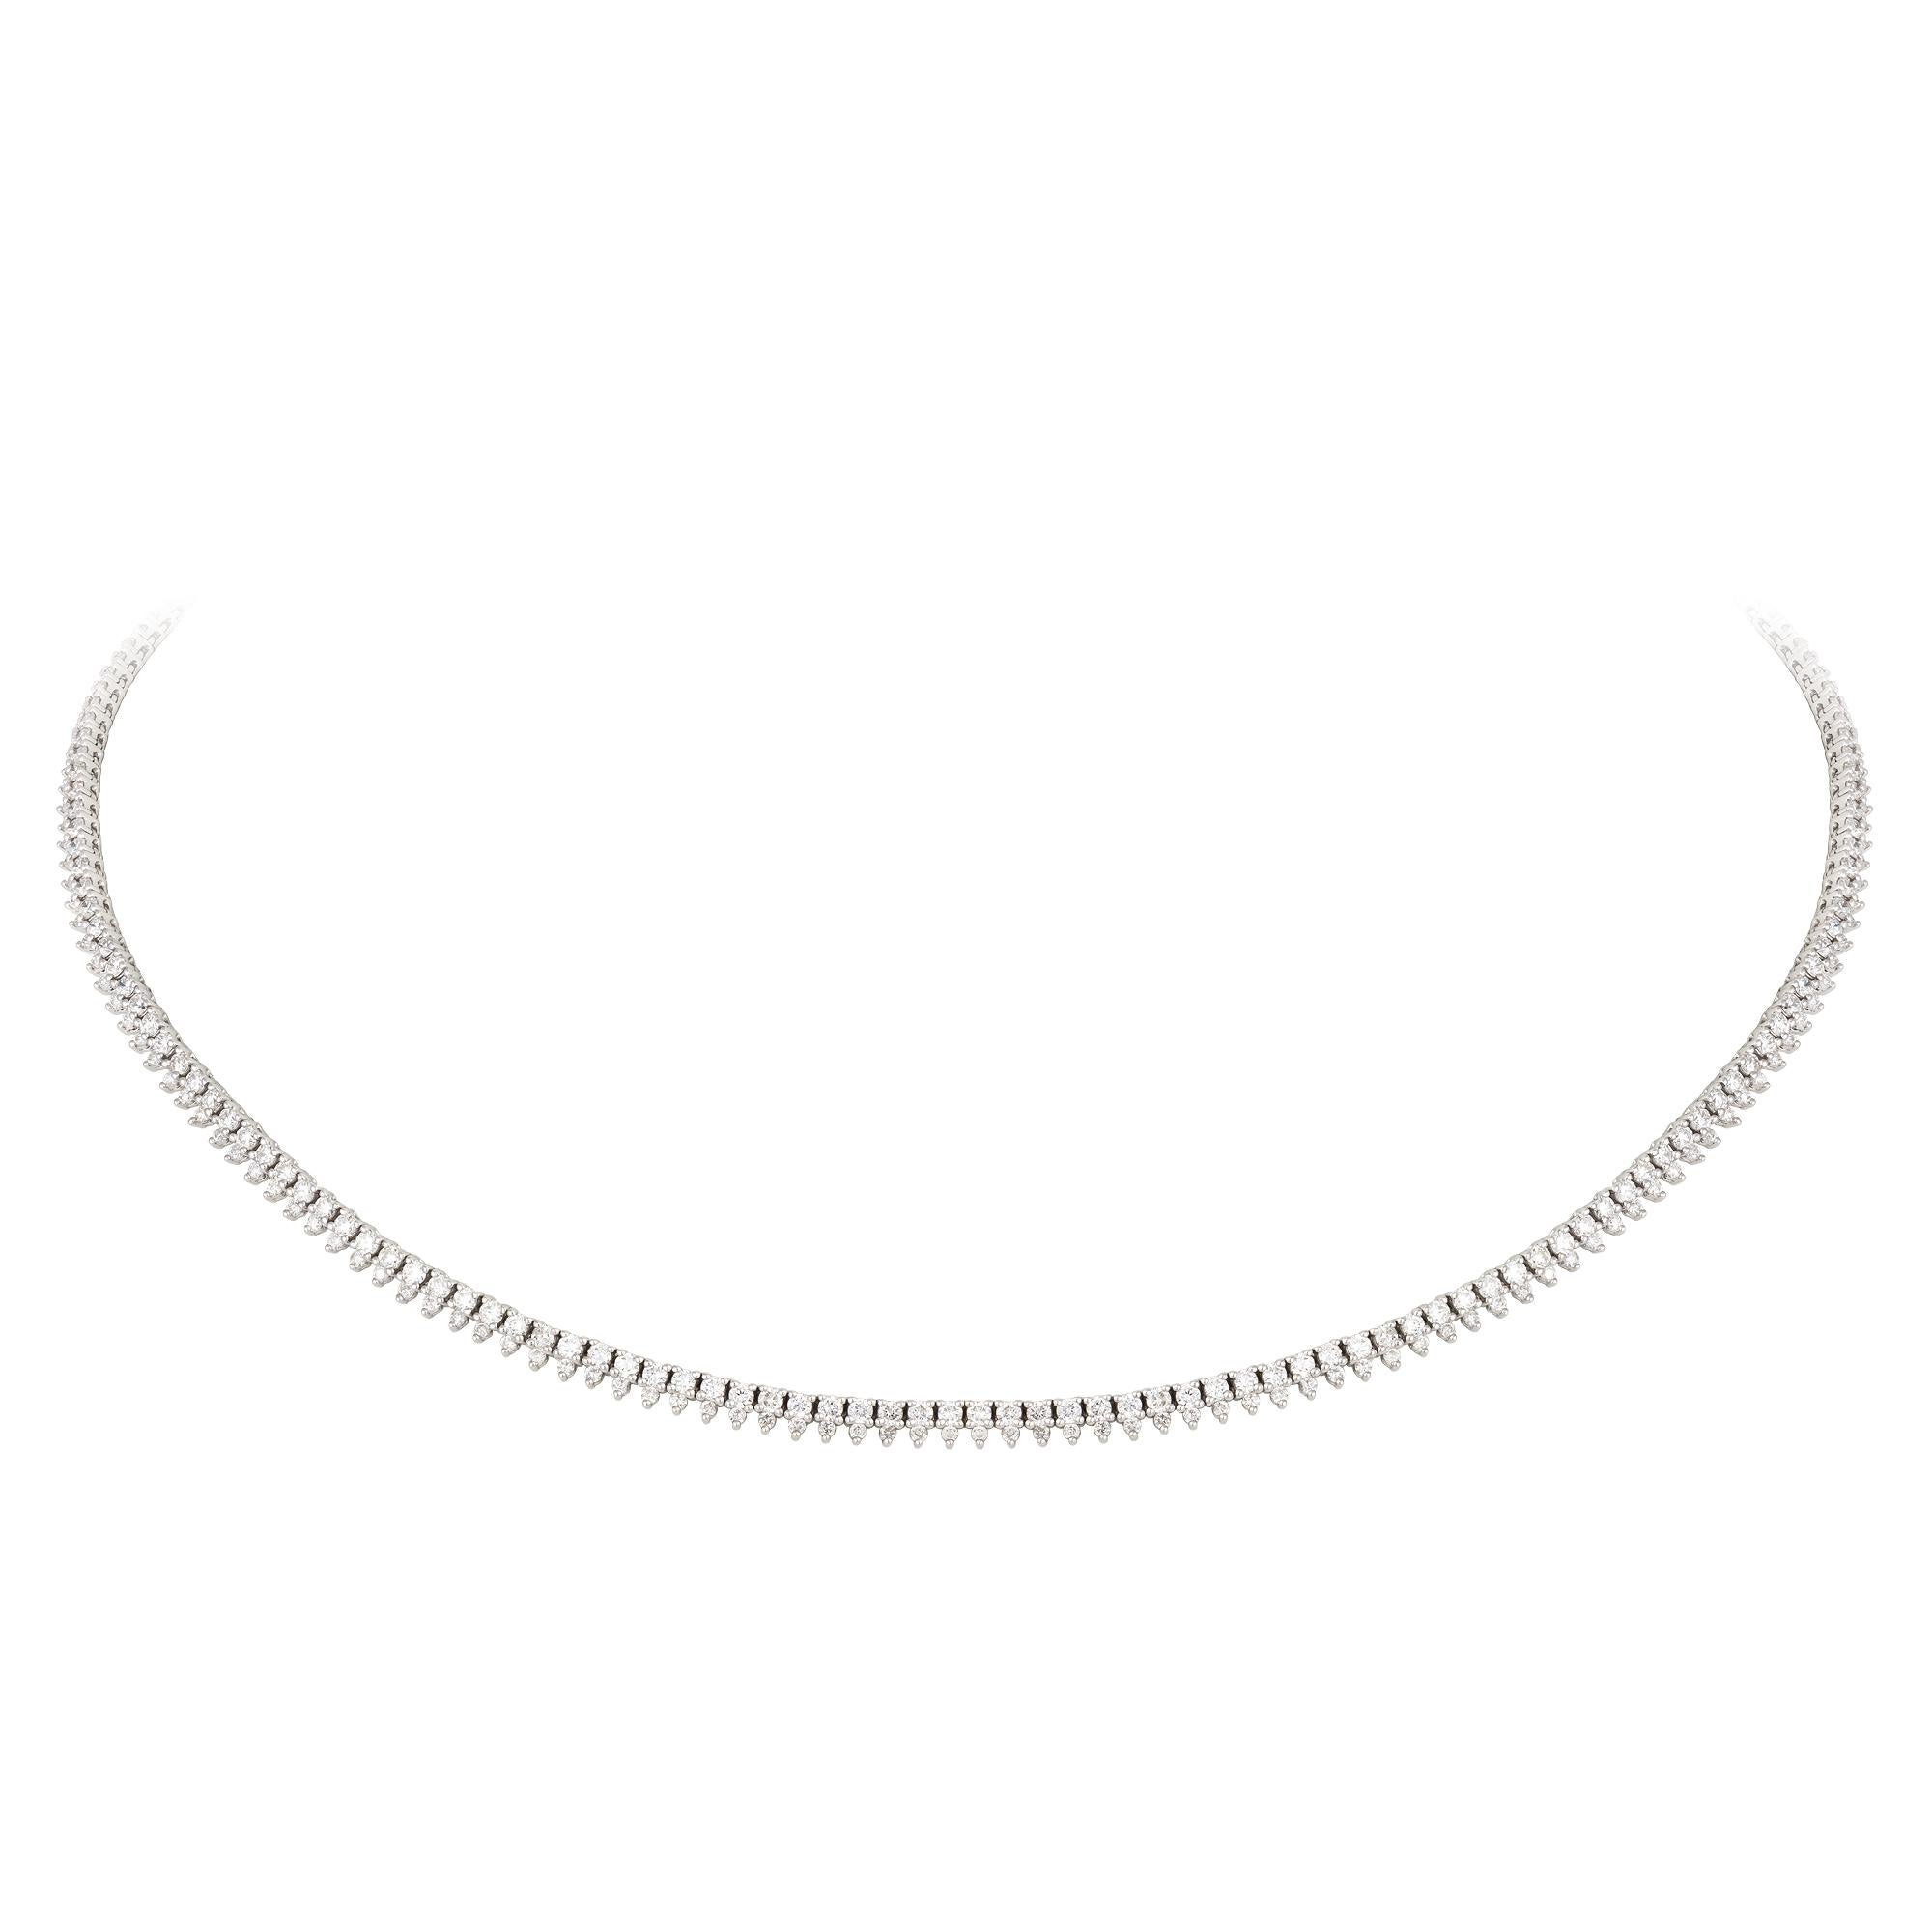 Necklace White Gold 18 K
Diamond 3.10 Cts/248 Pcs

Weight 11,43 grams

With a heritage of ancient fine Swiss jewelry traditions, NATKINA is a Geneva based jewellery brand, which creates modern jewellery masterpieces suitable for every day life.
It